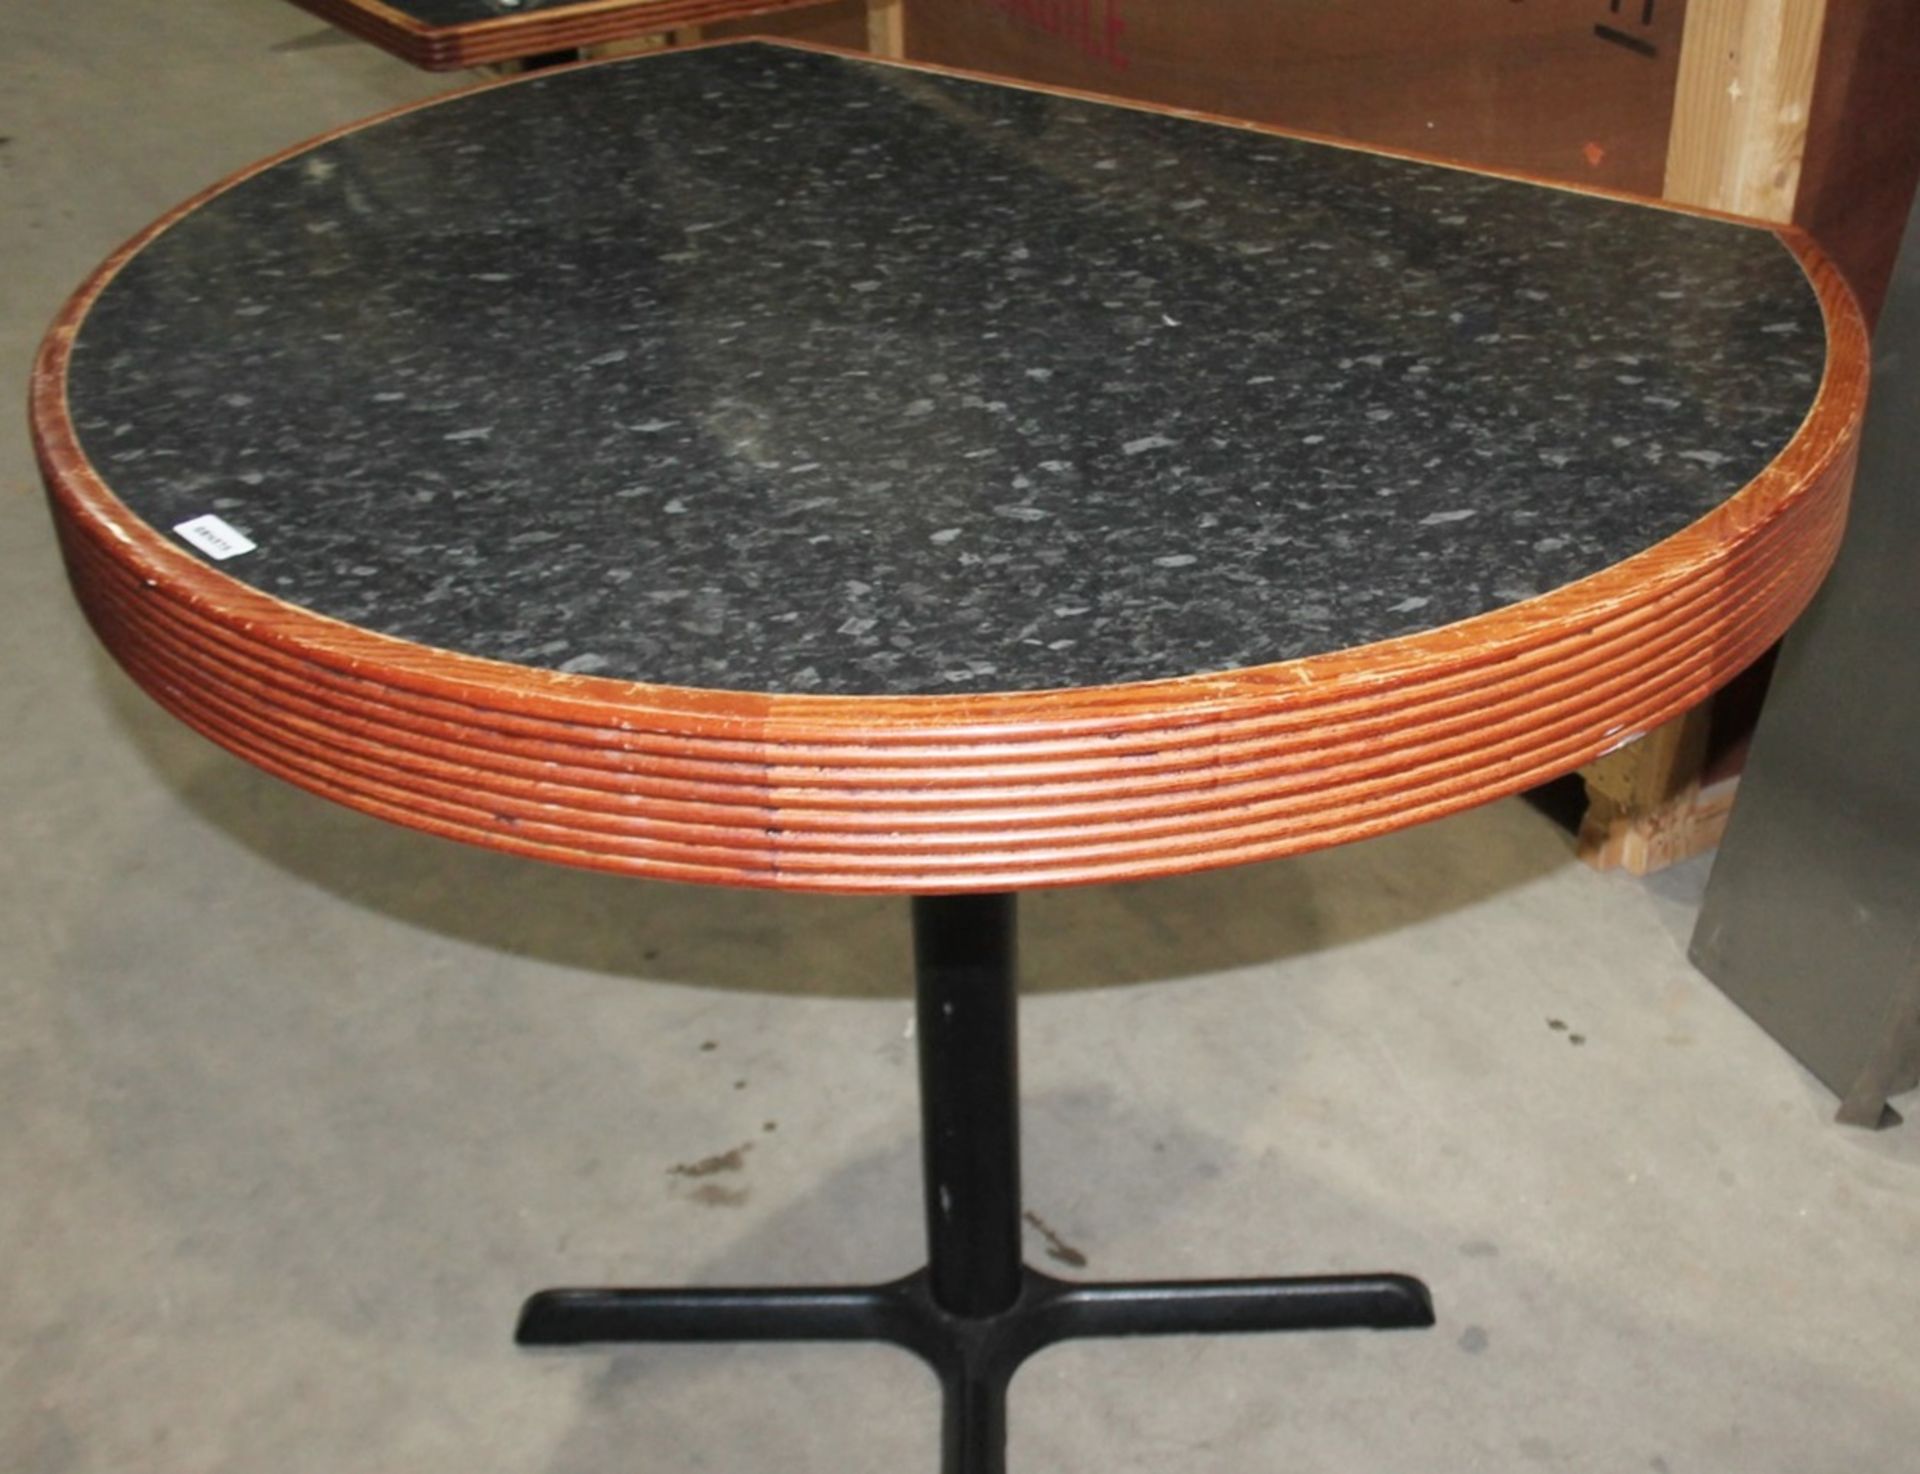 2 x Restaurant Semi-Circle Dining Tables With Granite Style Surface, Wooden Edging and Cast Iron - Image 2 of 4